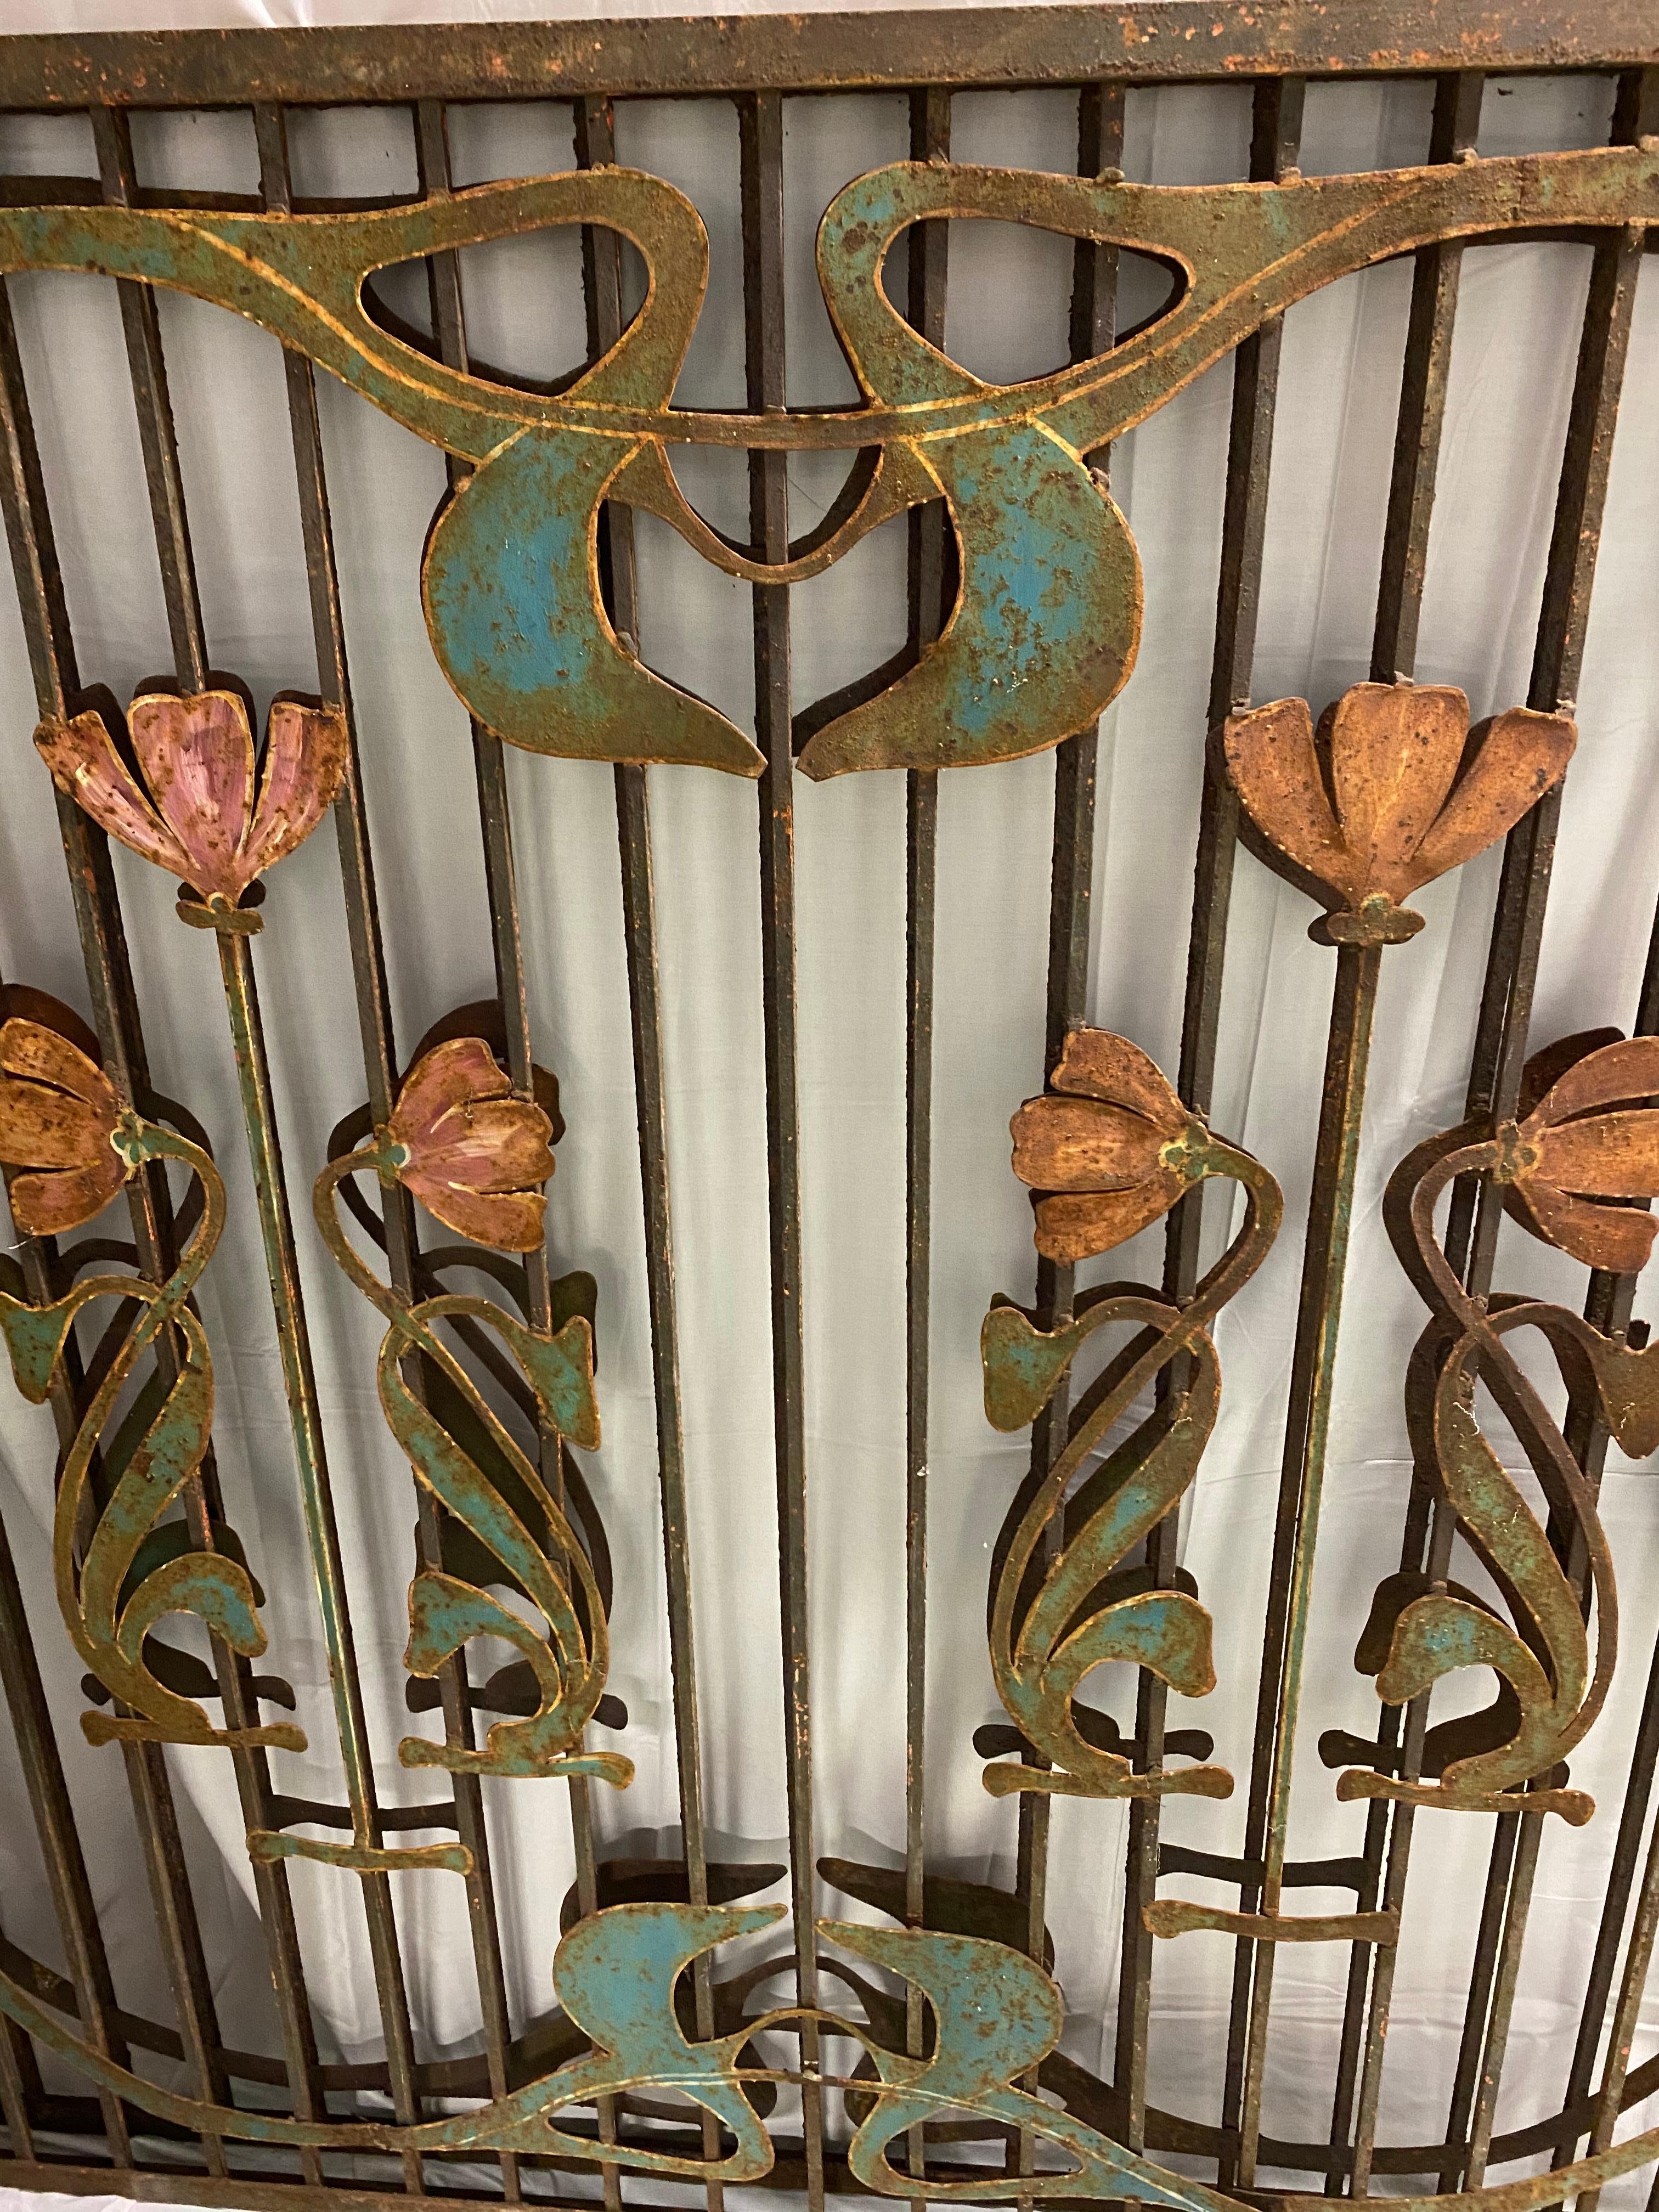 Painted Pair of French Art Nouveau Wrought Iron Garden Gates, Early 20th Century For Sale